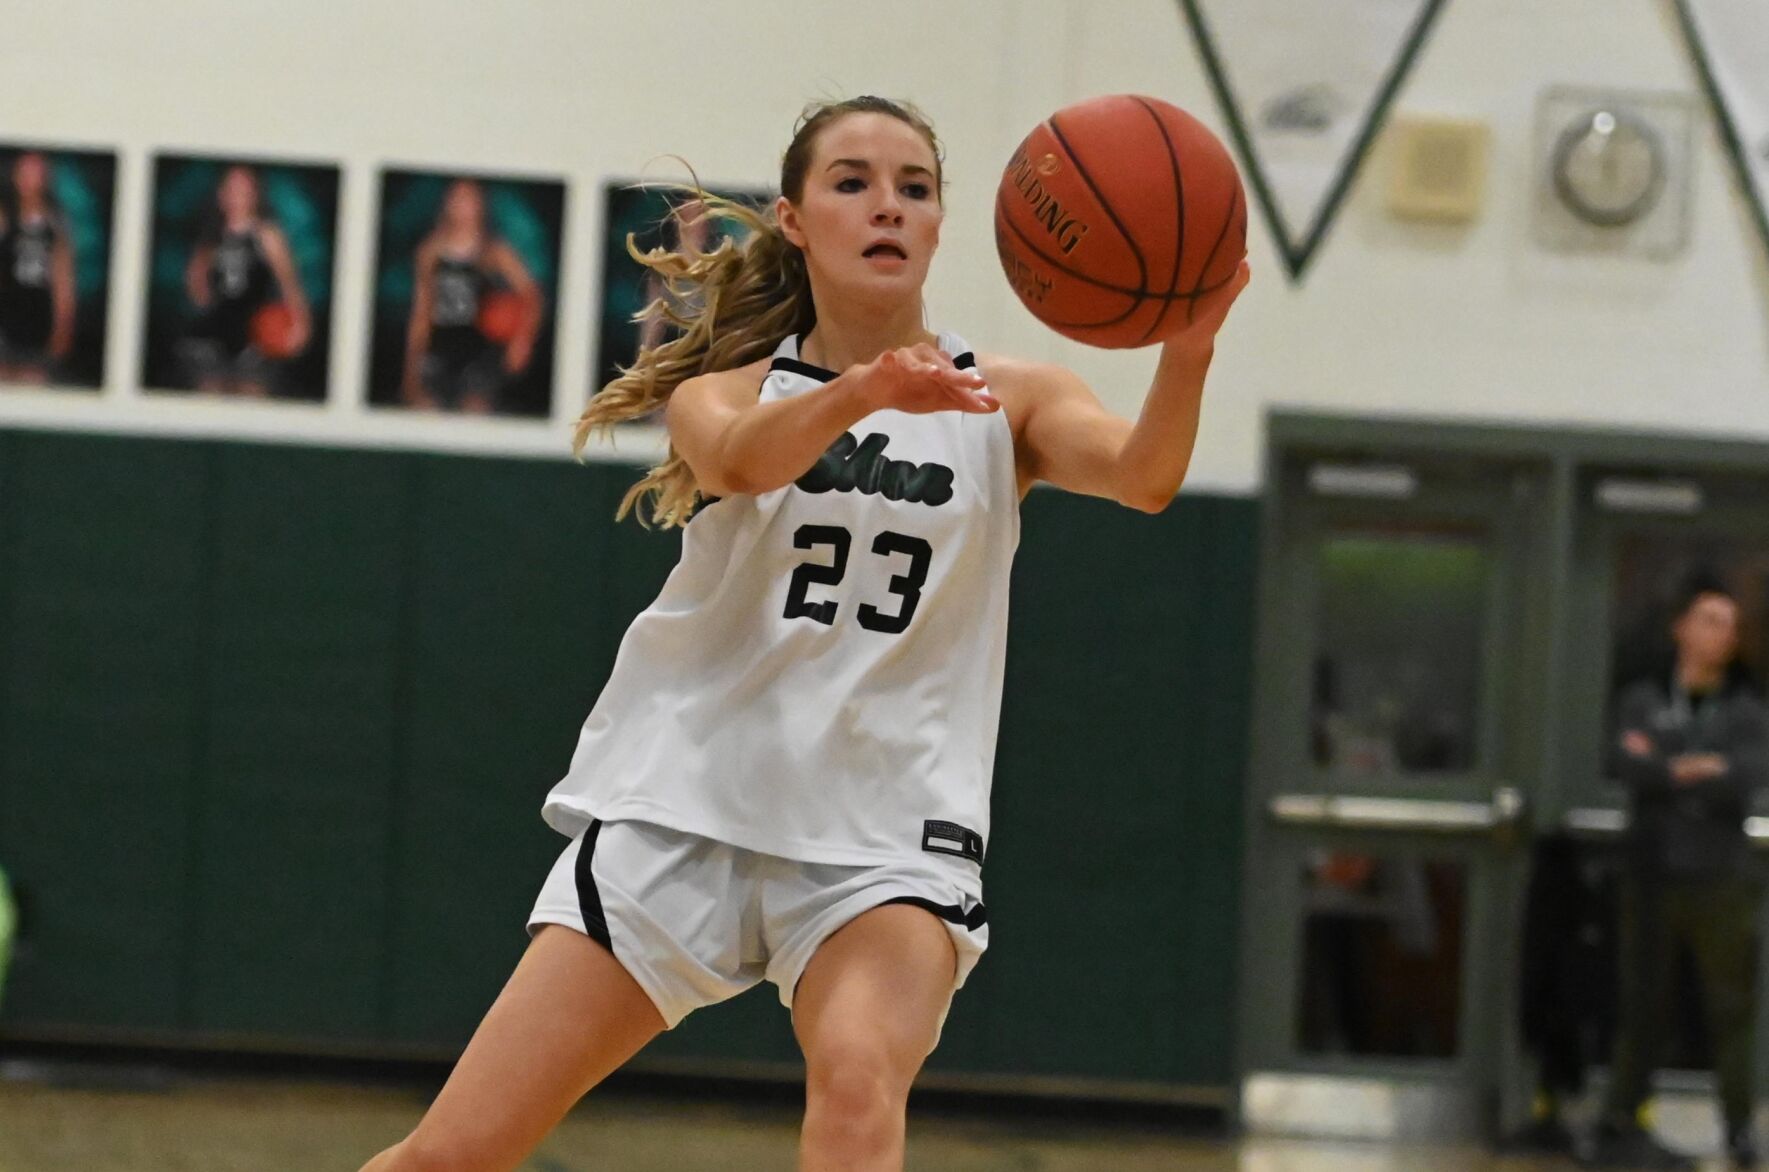 Section 2 Girls’ Basketball Tournament: Key Matchups and Strong Performances to Watch